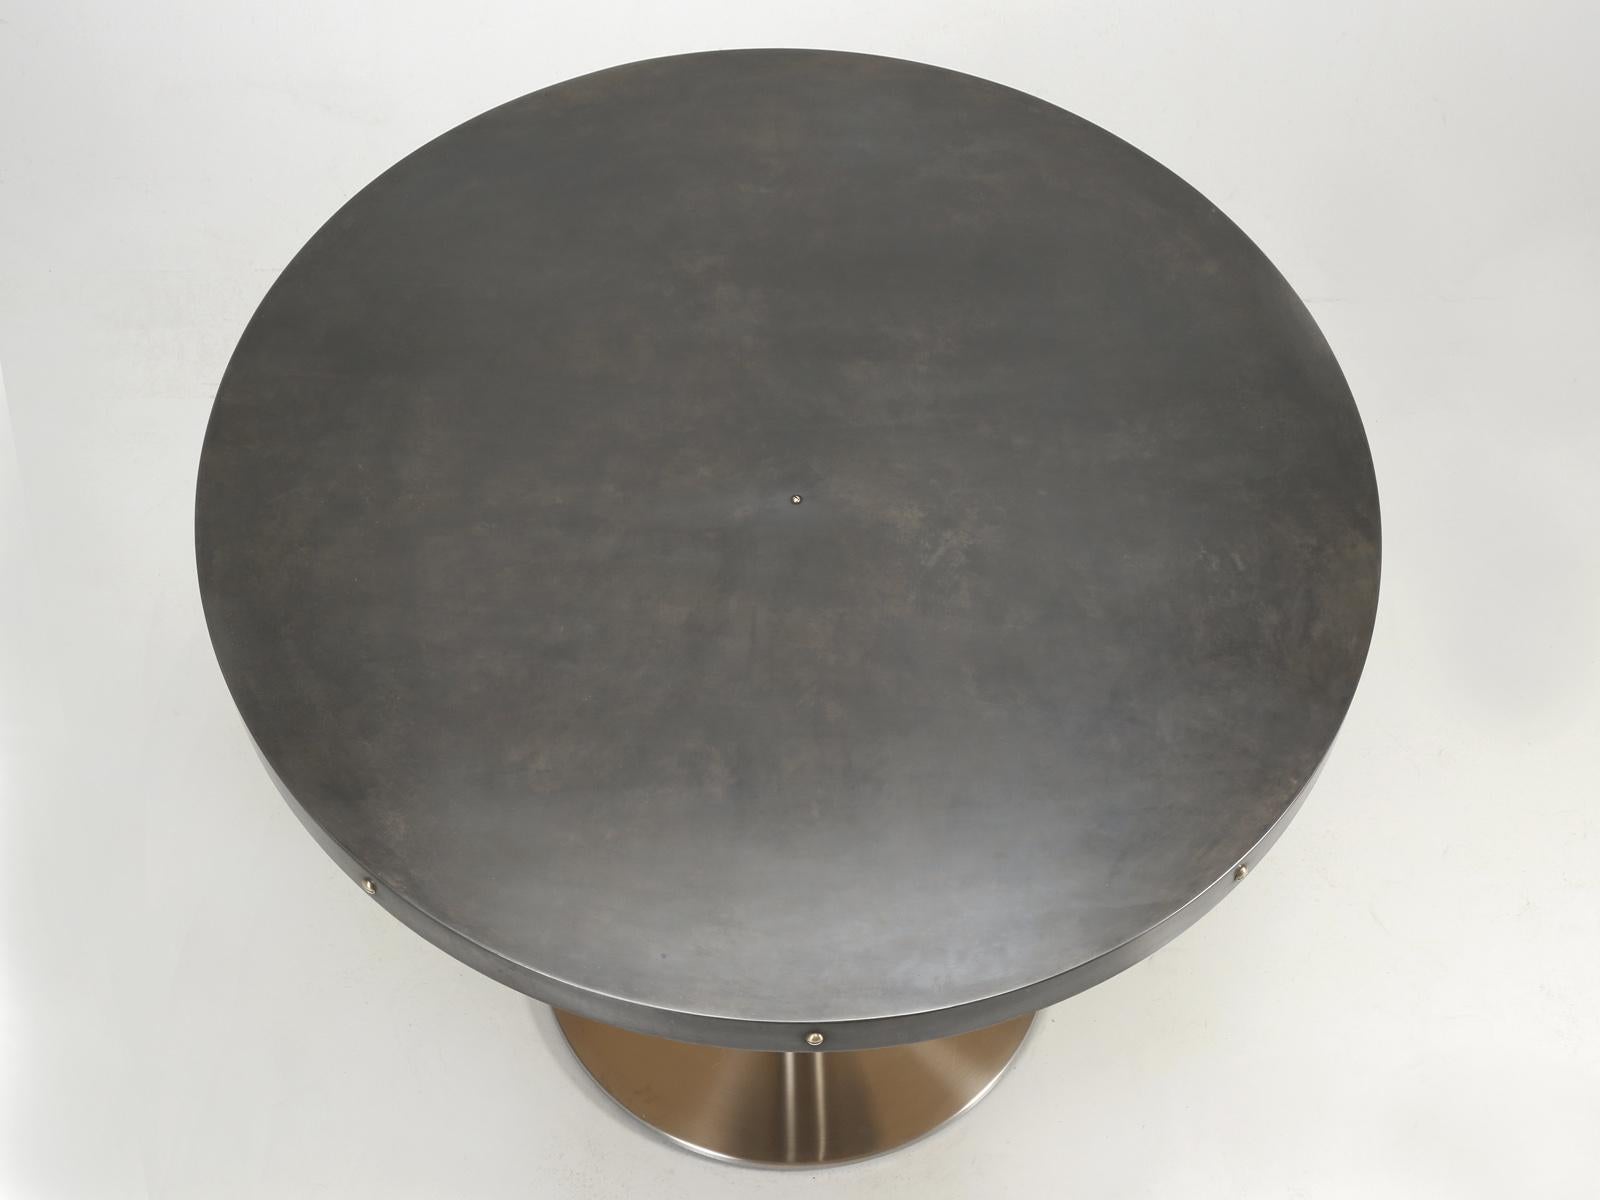 Round kitchen table, with a beautifully aged zinc top and an indestructible stainless-steel base. The zinc table is surrounded by solid brass slotted screws, which are both functional and add a bit of pop to the otherwise monochromatic scheme. 